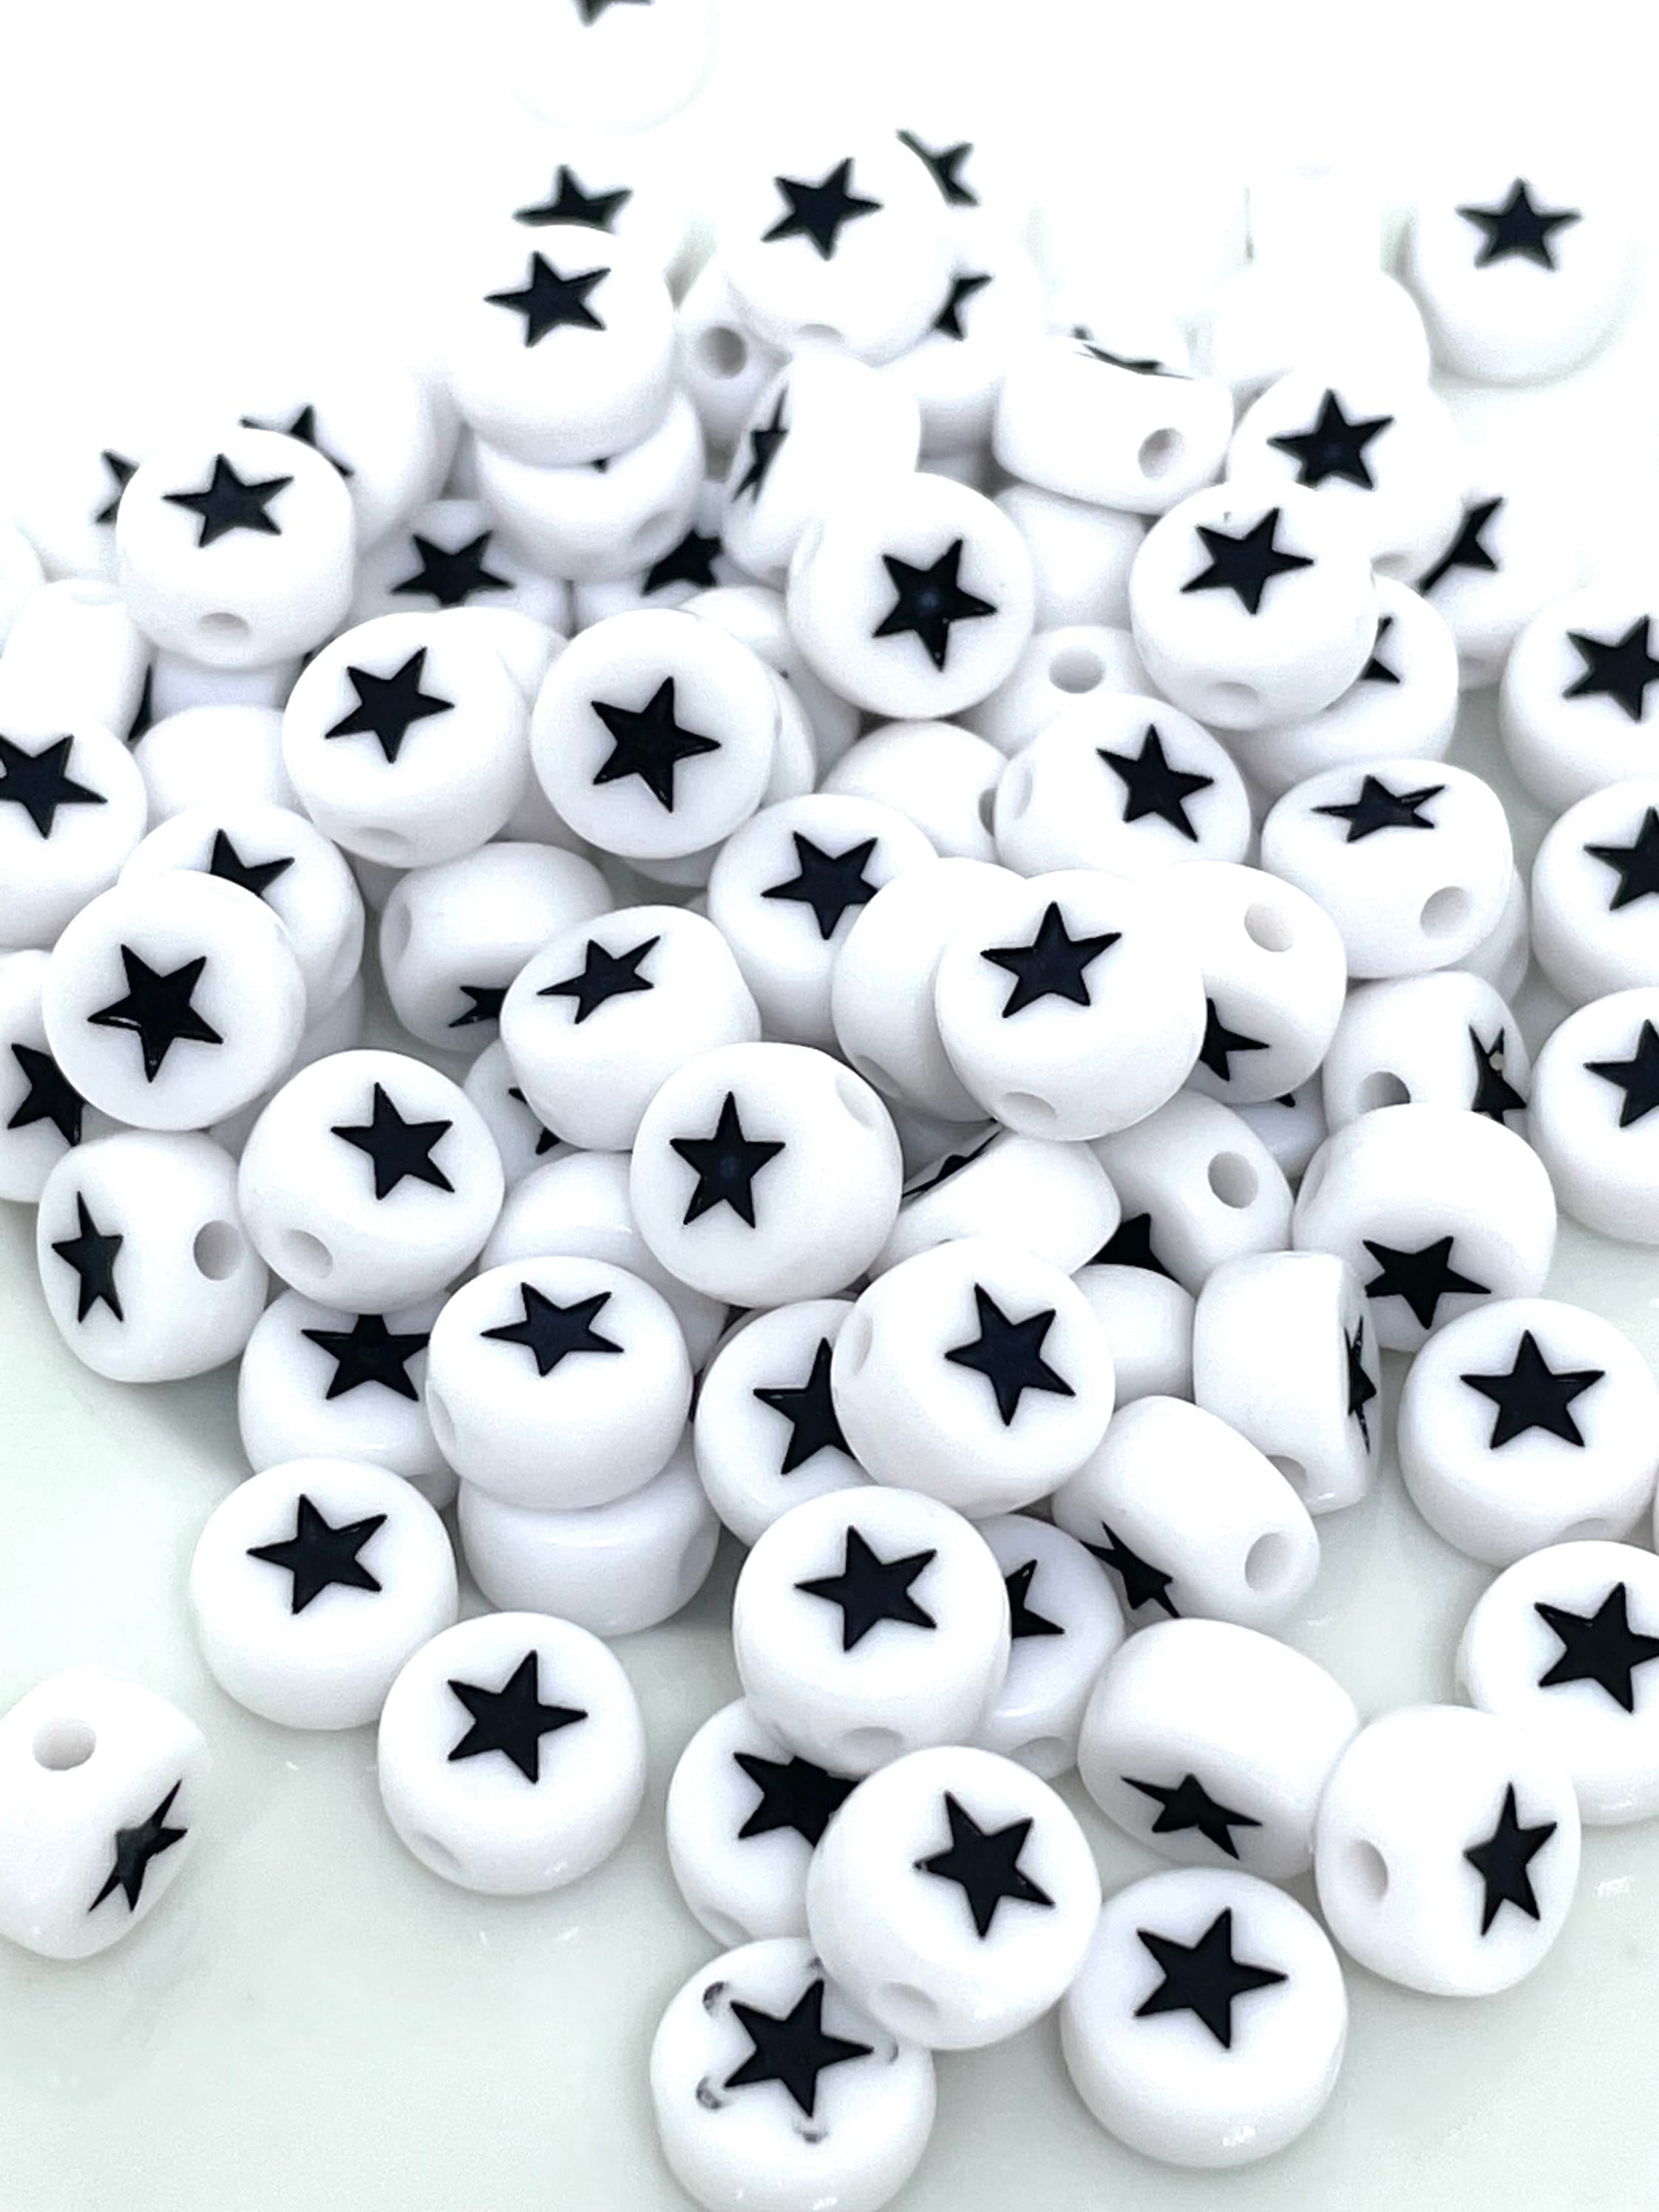 Black and White Star Coin Beads, 7mm Beads, Spacers for Alphabet Beads, Spacers for Letter Beads, Star Beads, Kawaii Beads, Unique Beads